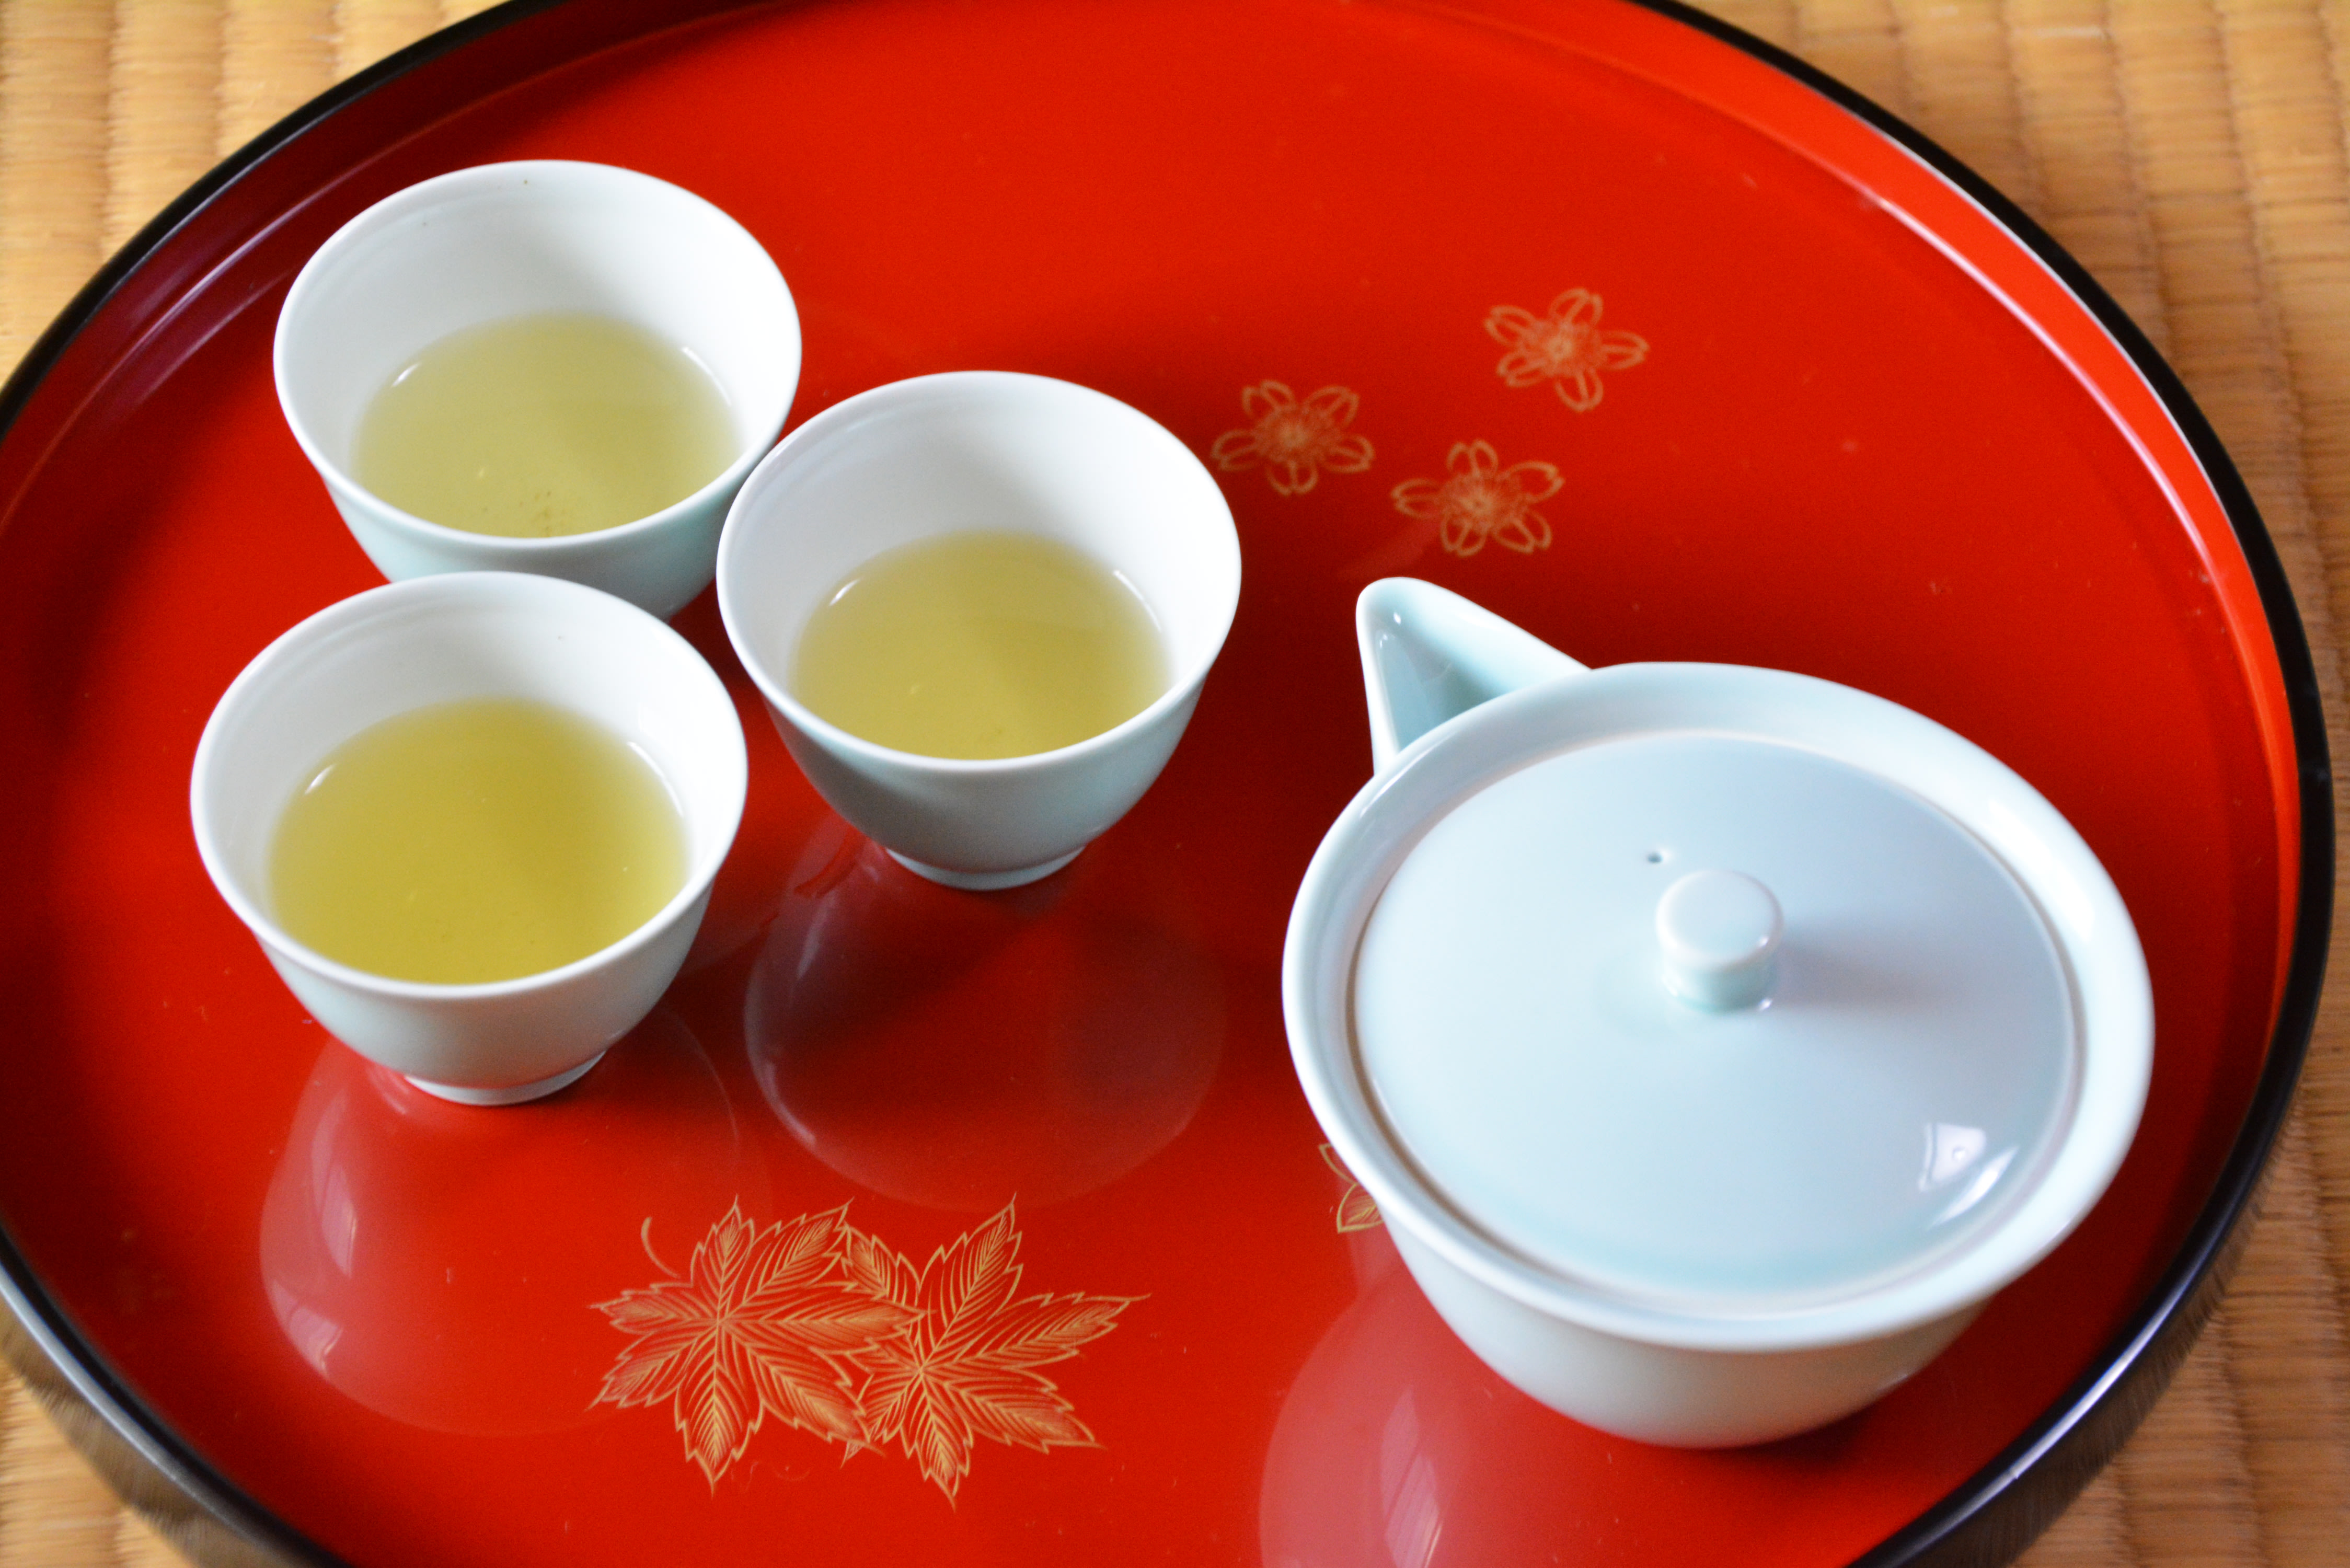 A Japanese teapot sits on a red tray with three cups of tea. The cups have green tea in them.